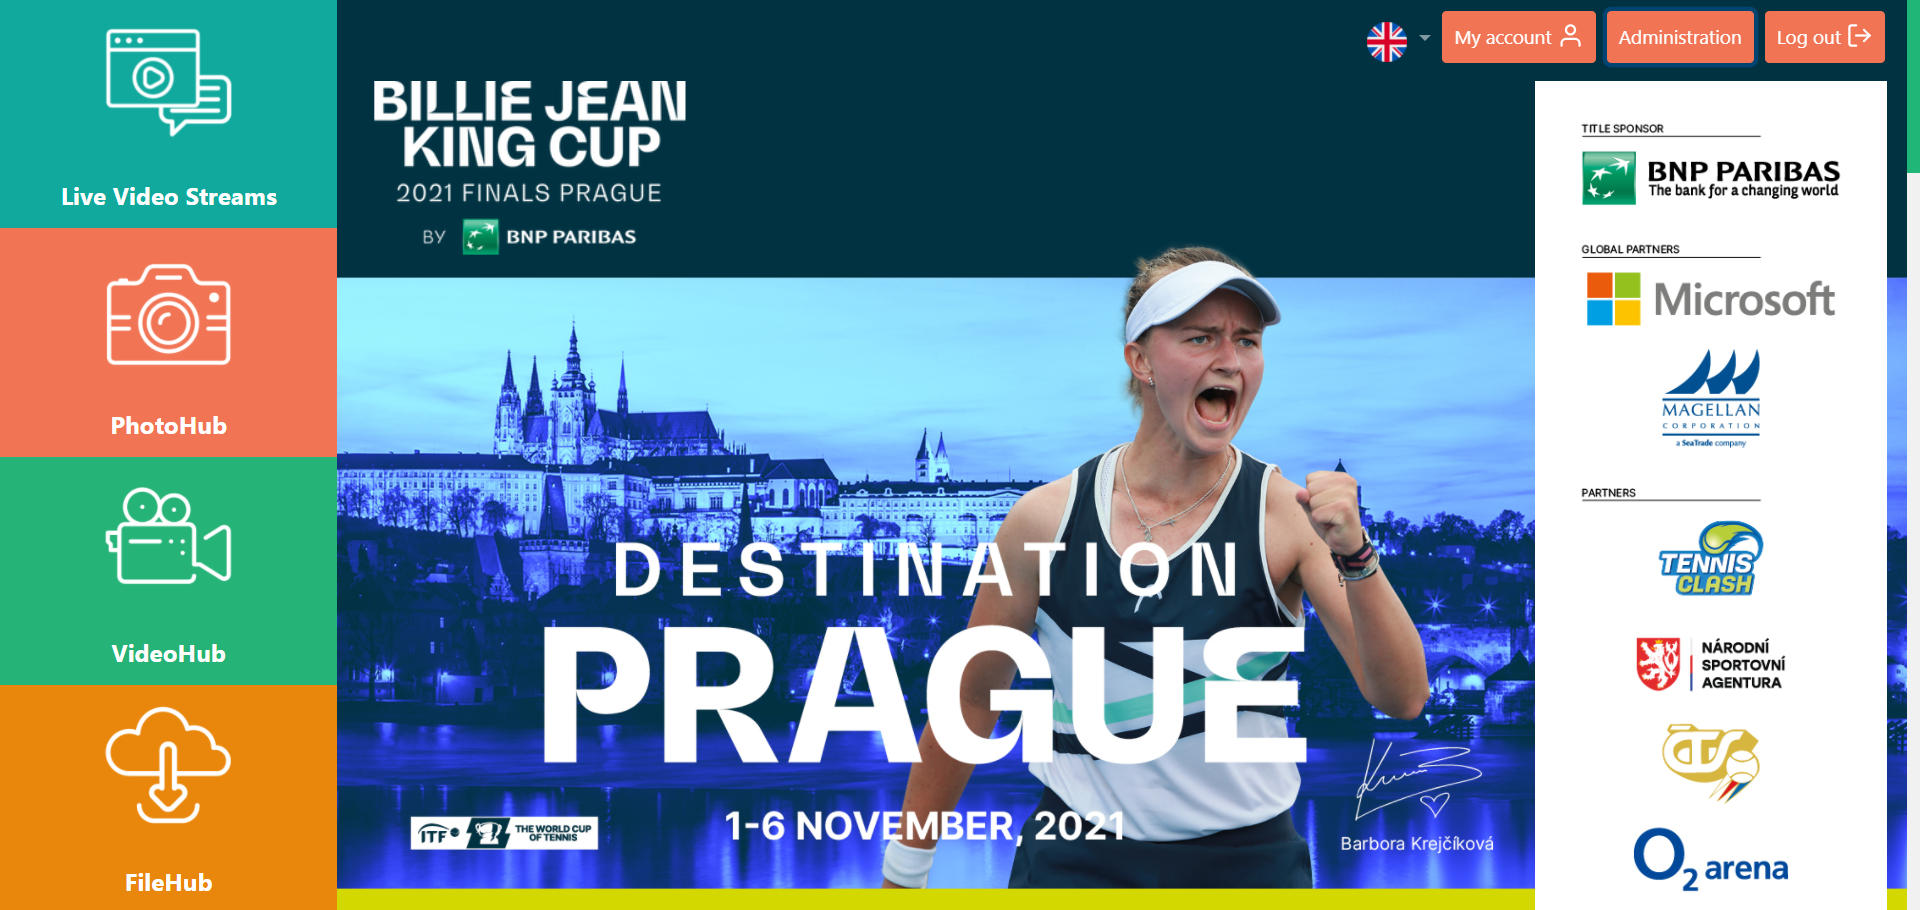 ITF once more using kveeq to aid media coverage of Billie Jean King Cup